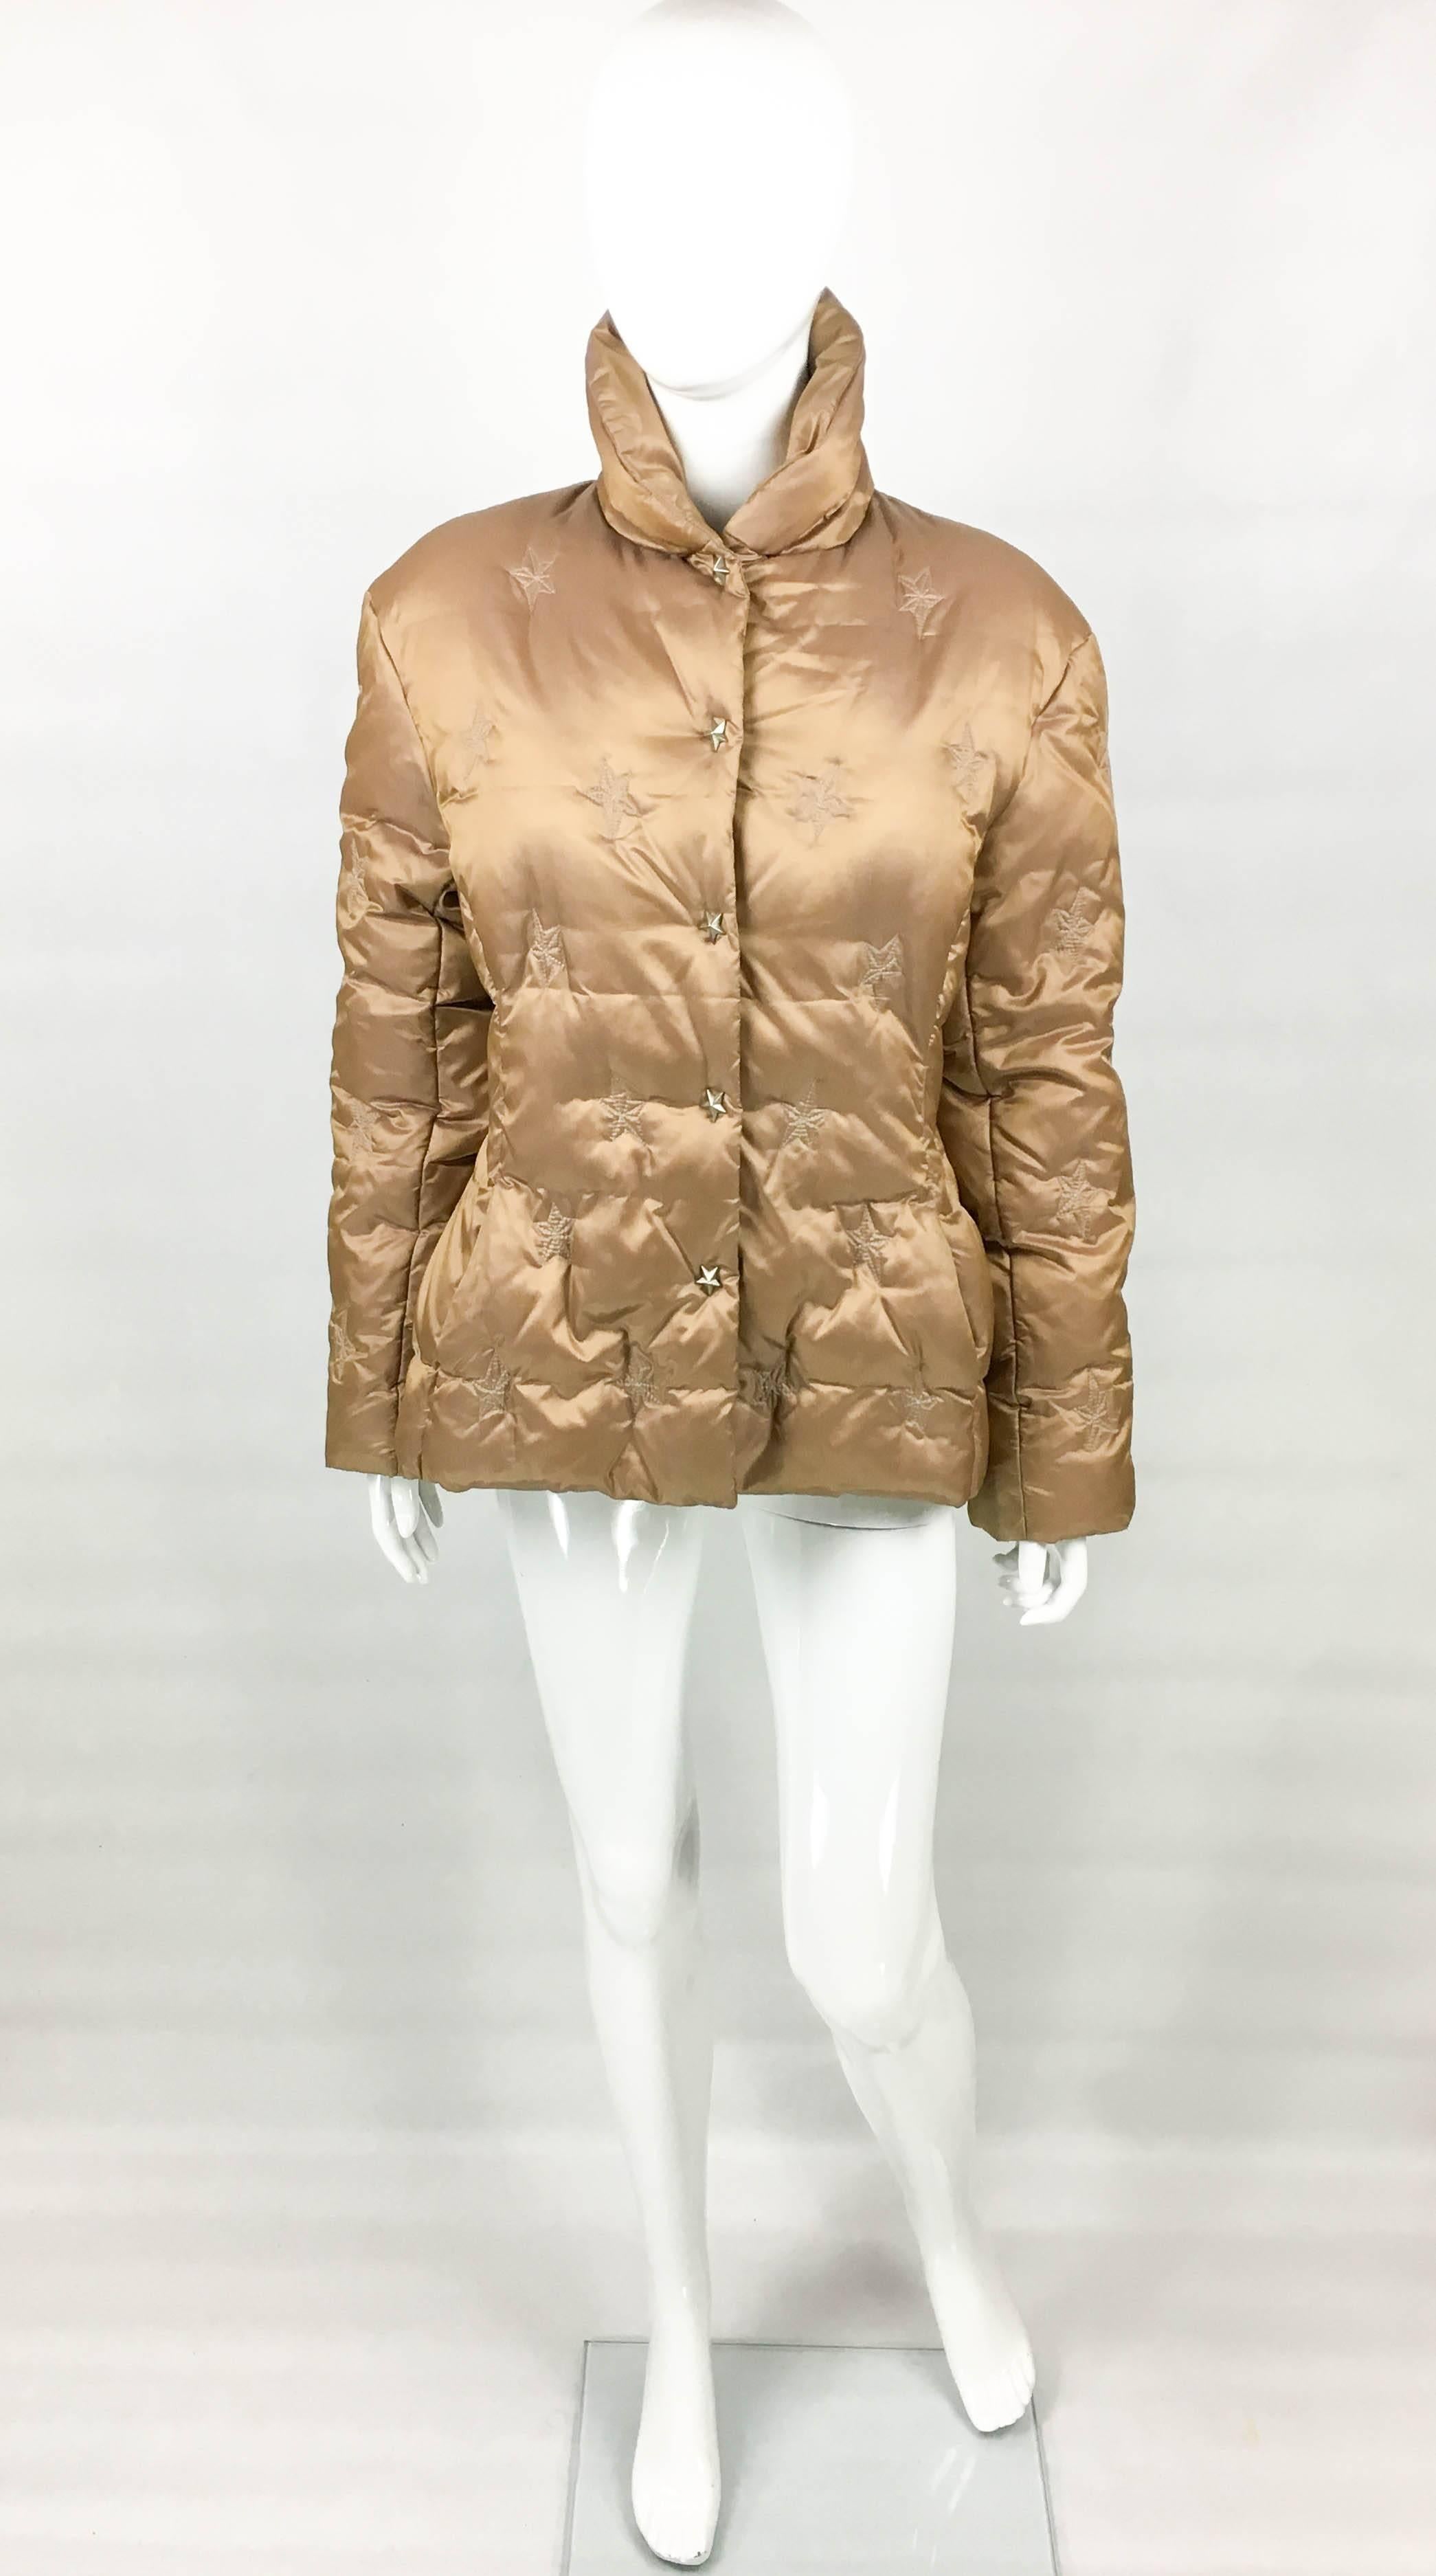 Vintage Mugler Bronze Puffer Jacket. This fabulous piece by Thierry Mugler dates back from the 1990’s. Made in nylon, the jacket is filled with duck feathers. In a beautiful shade of bronze, it features embroidered stars throughout. There are 5